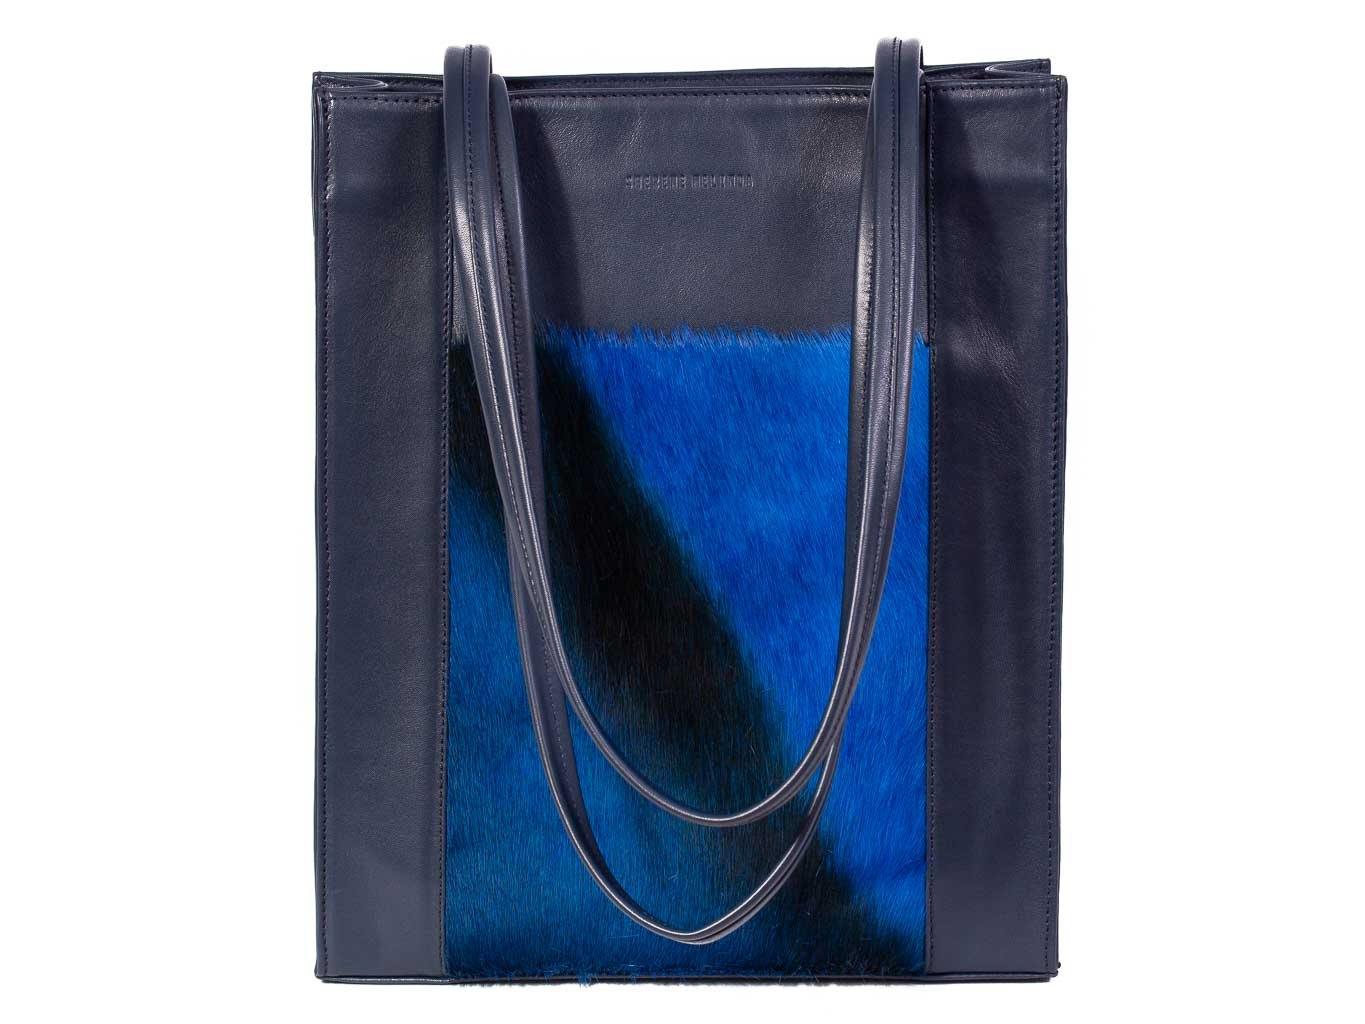 Tote Springbok Handbag in Navy Blue with a stripe feature by Sherene Melinda front handle